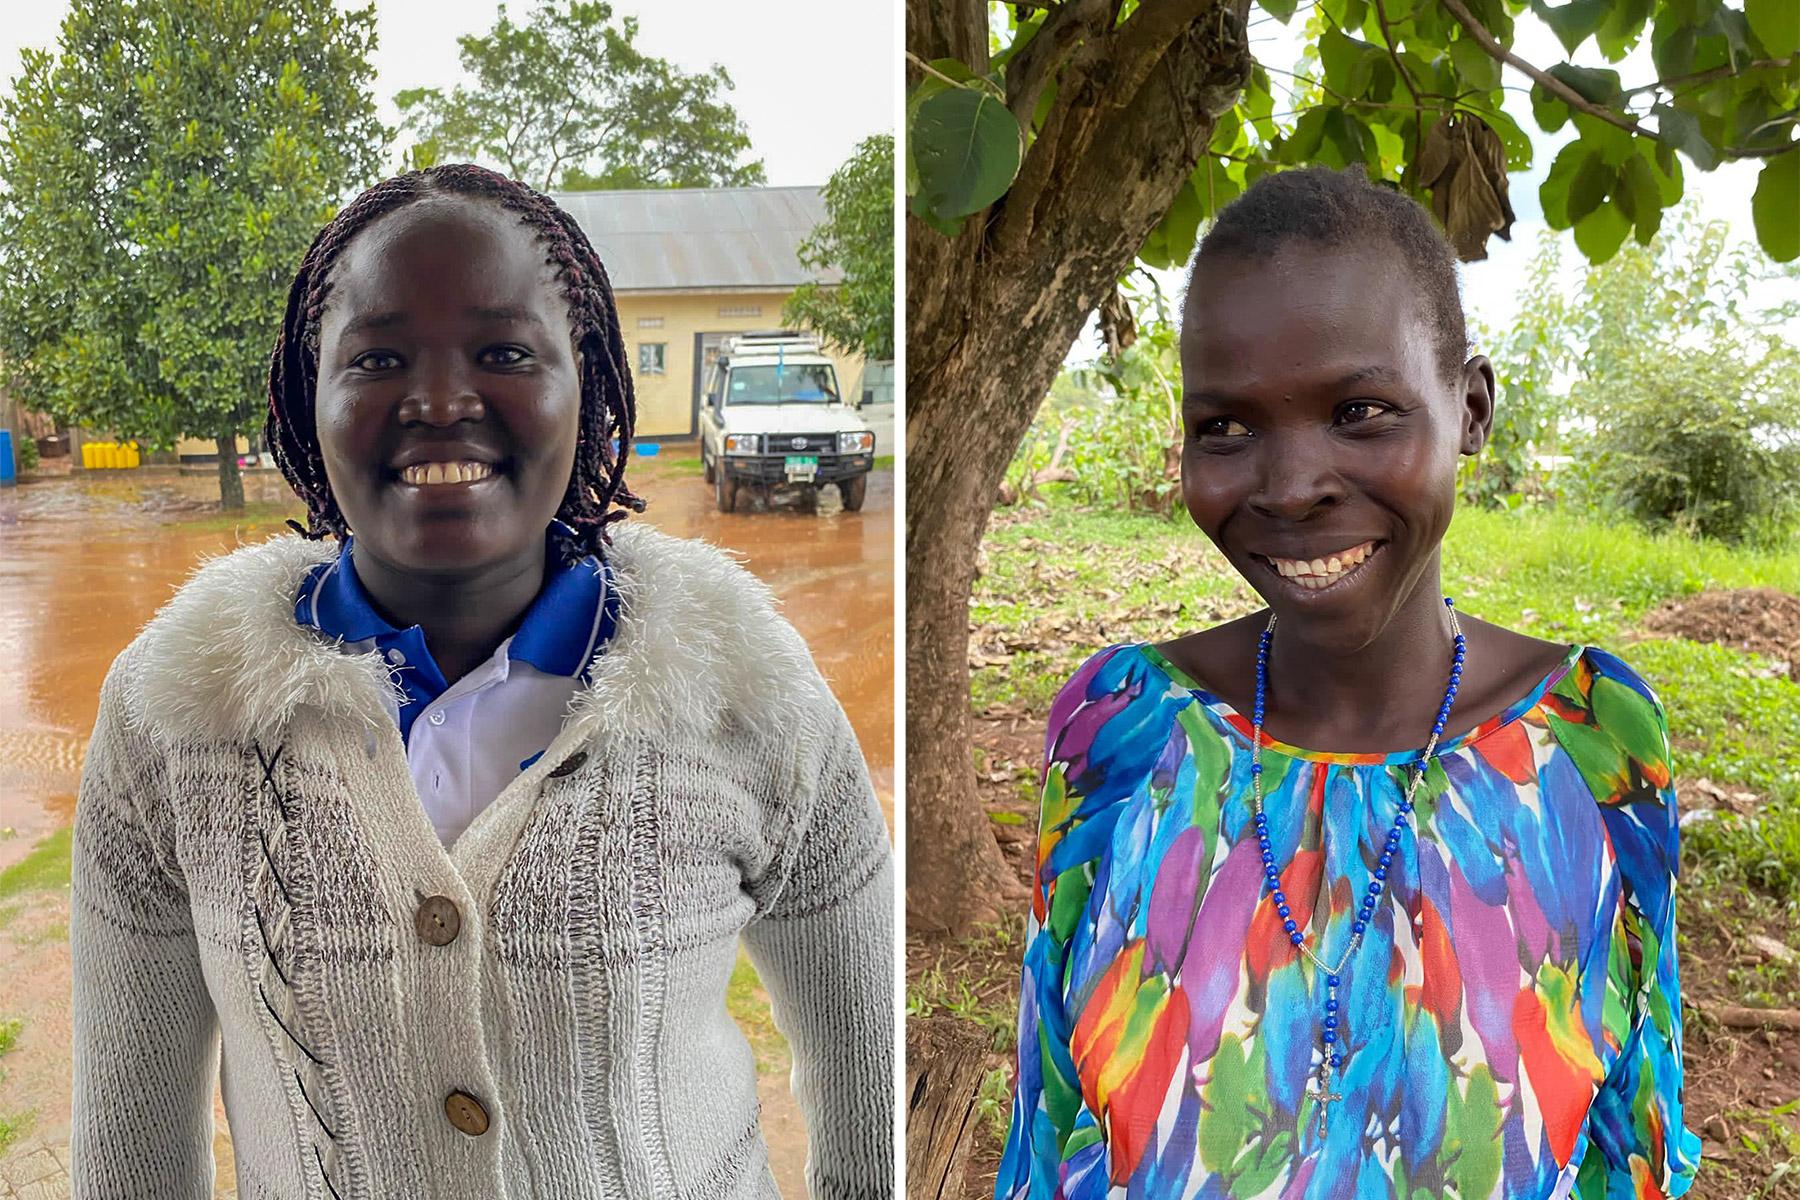 Adyero Paradise (left), a returnee in Magwi County and LWF South Sudan staff member â Lillian (right), a returnee in Magwi County interviewed by LWF South Sudan, September 2021. Photo: LWF/ C. Mattner